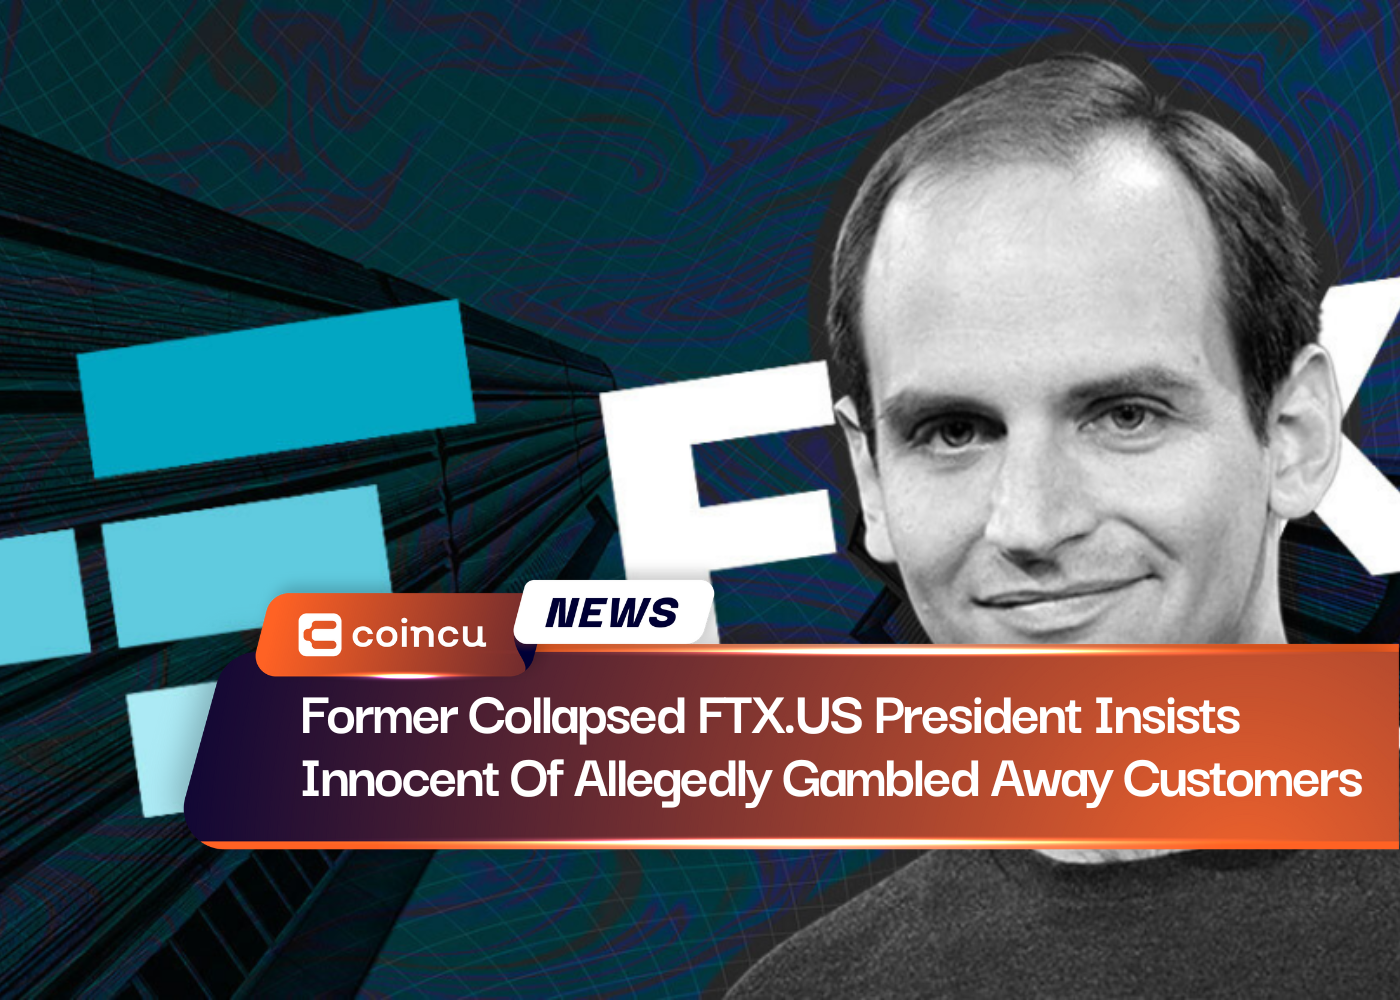 Former Collapsed FTX.US President Insists Innocent Of Allegedly Gambled Away Customers